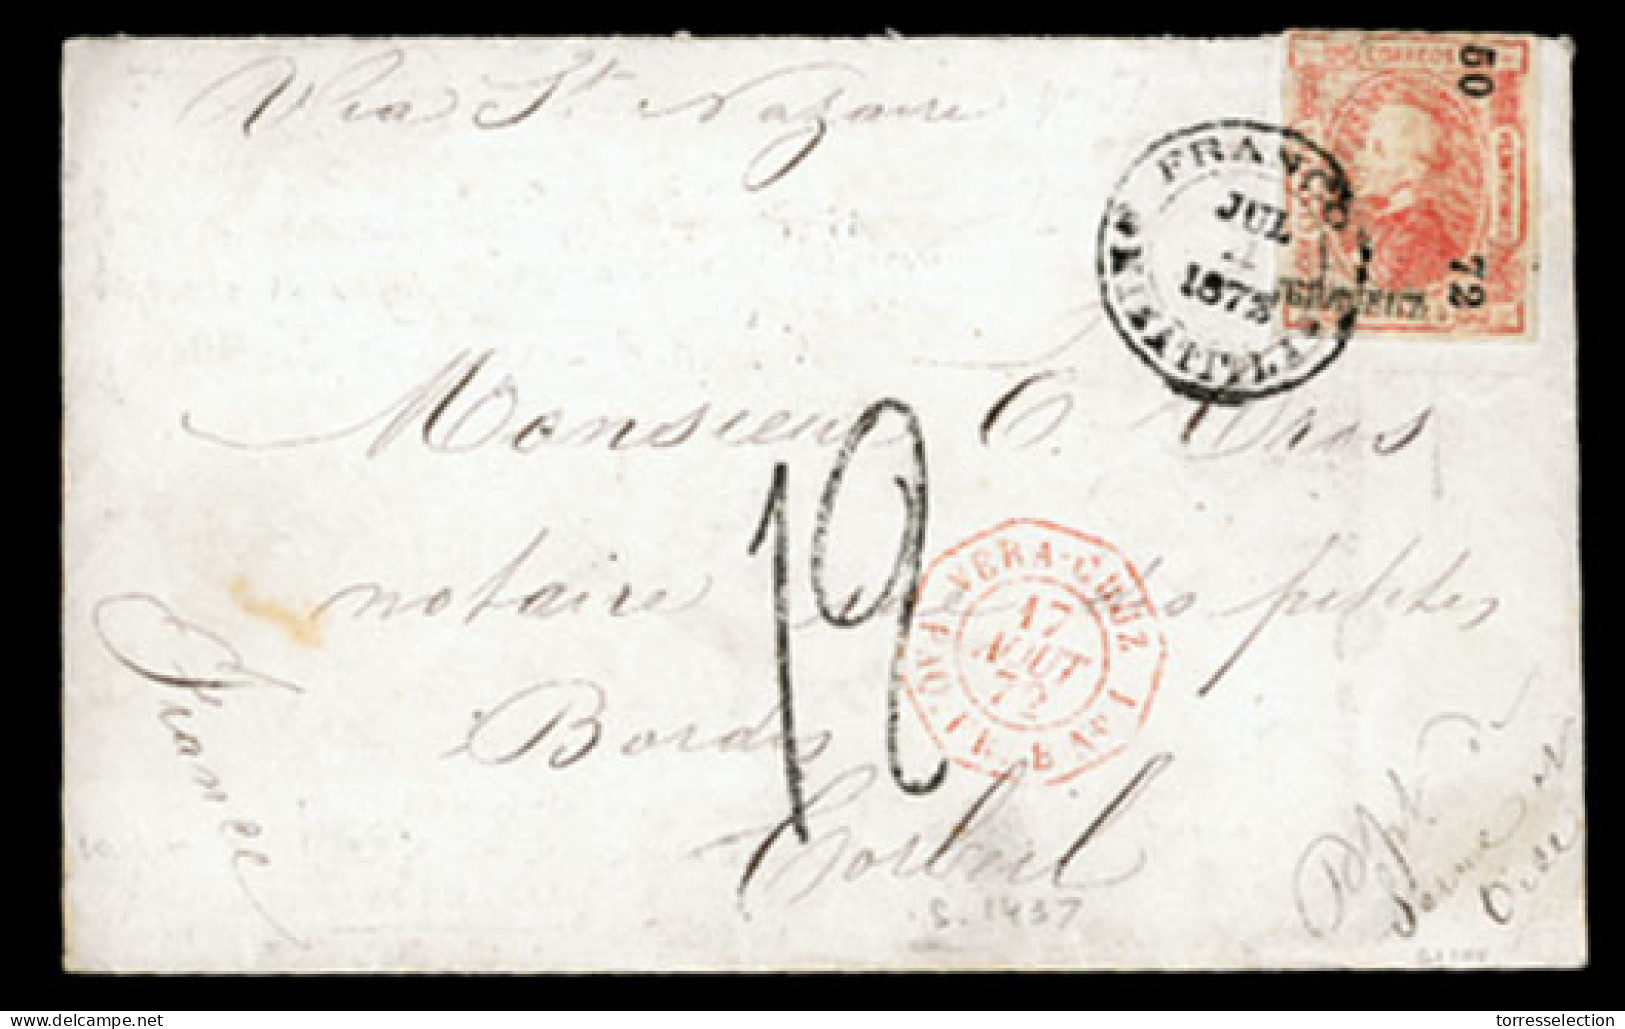 MEXICO. 1872(July 4th). Cover To Bordeaux Franked By Vera Cruz District Imperf 1872 25c Red (50-72) Tied By ‘Franco Mina - México